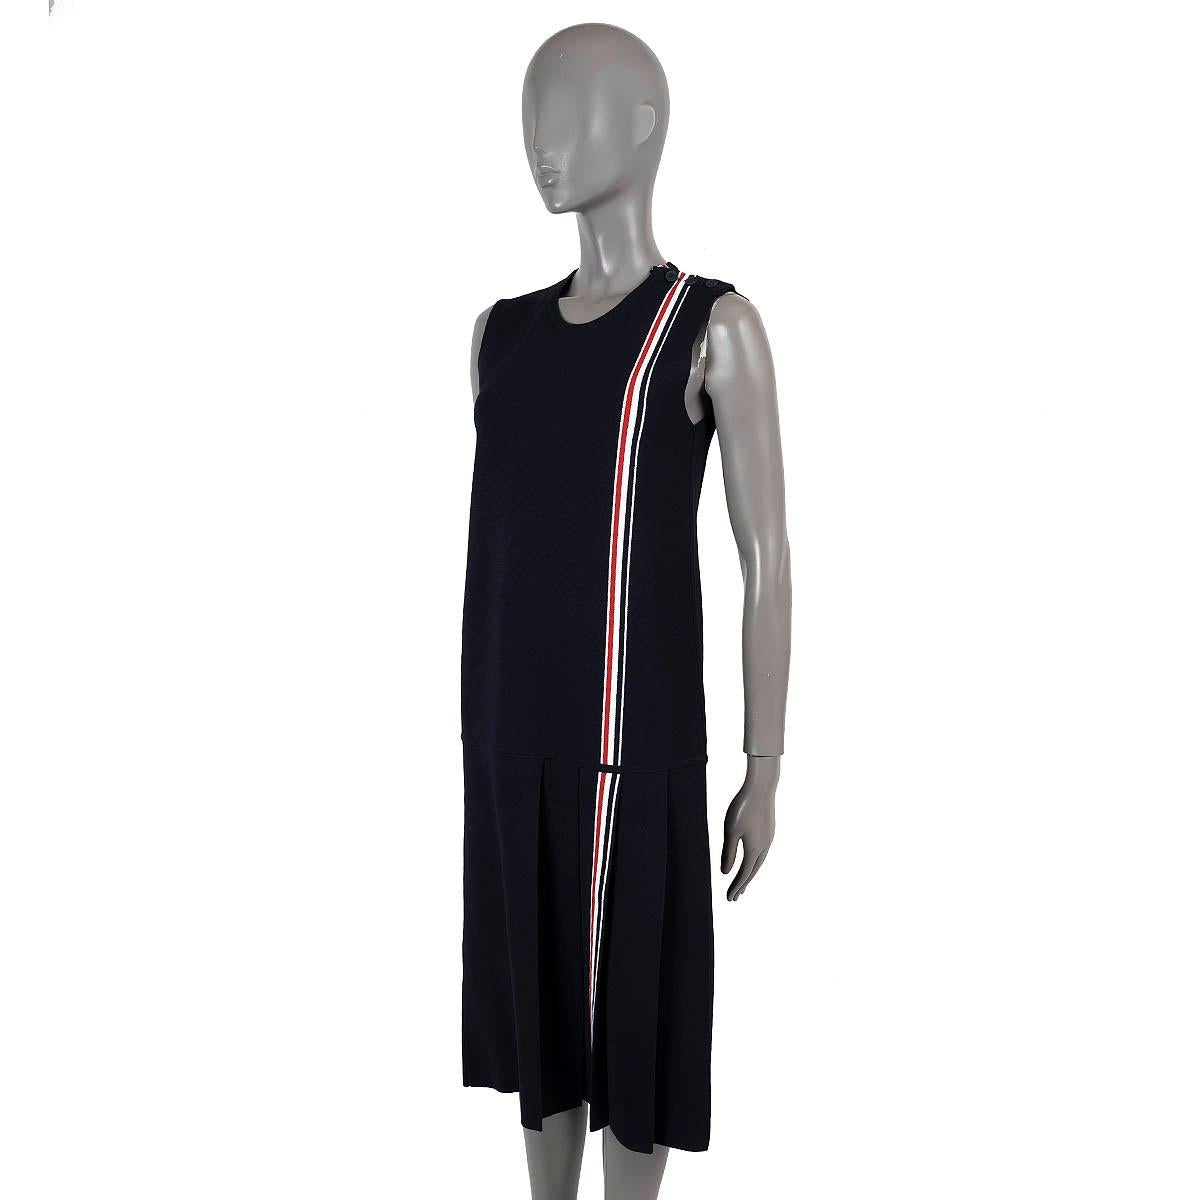 100% authentic Thom Browne sleeveless knit dress in navy blue viscose (75%) and polyester (25%). Features a crewneck, classic red-white-blue cricket strip and asymmetric pleated skirt. Unlined. Has been worn and is in excellent condition.